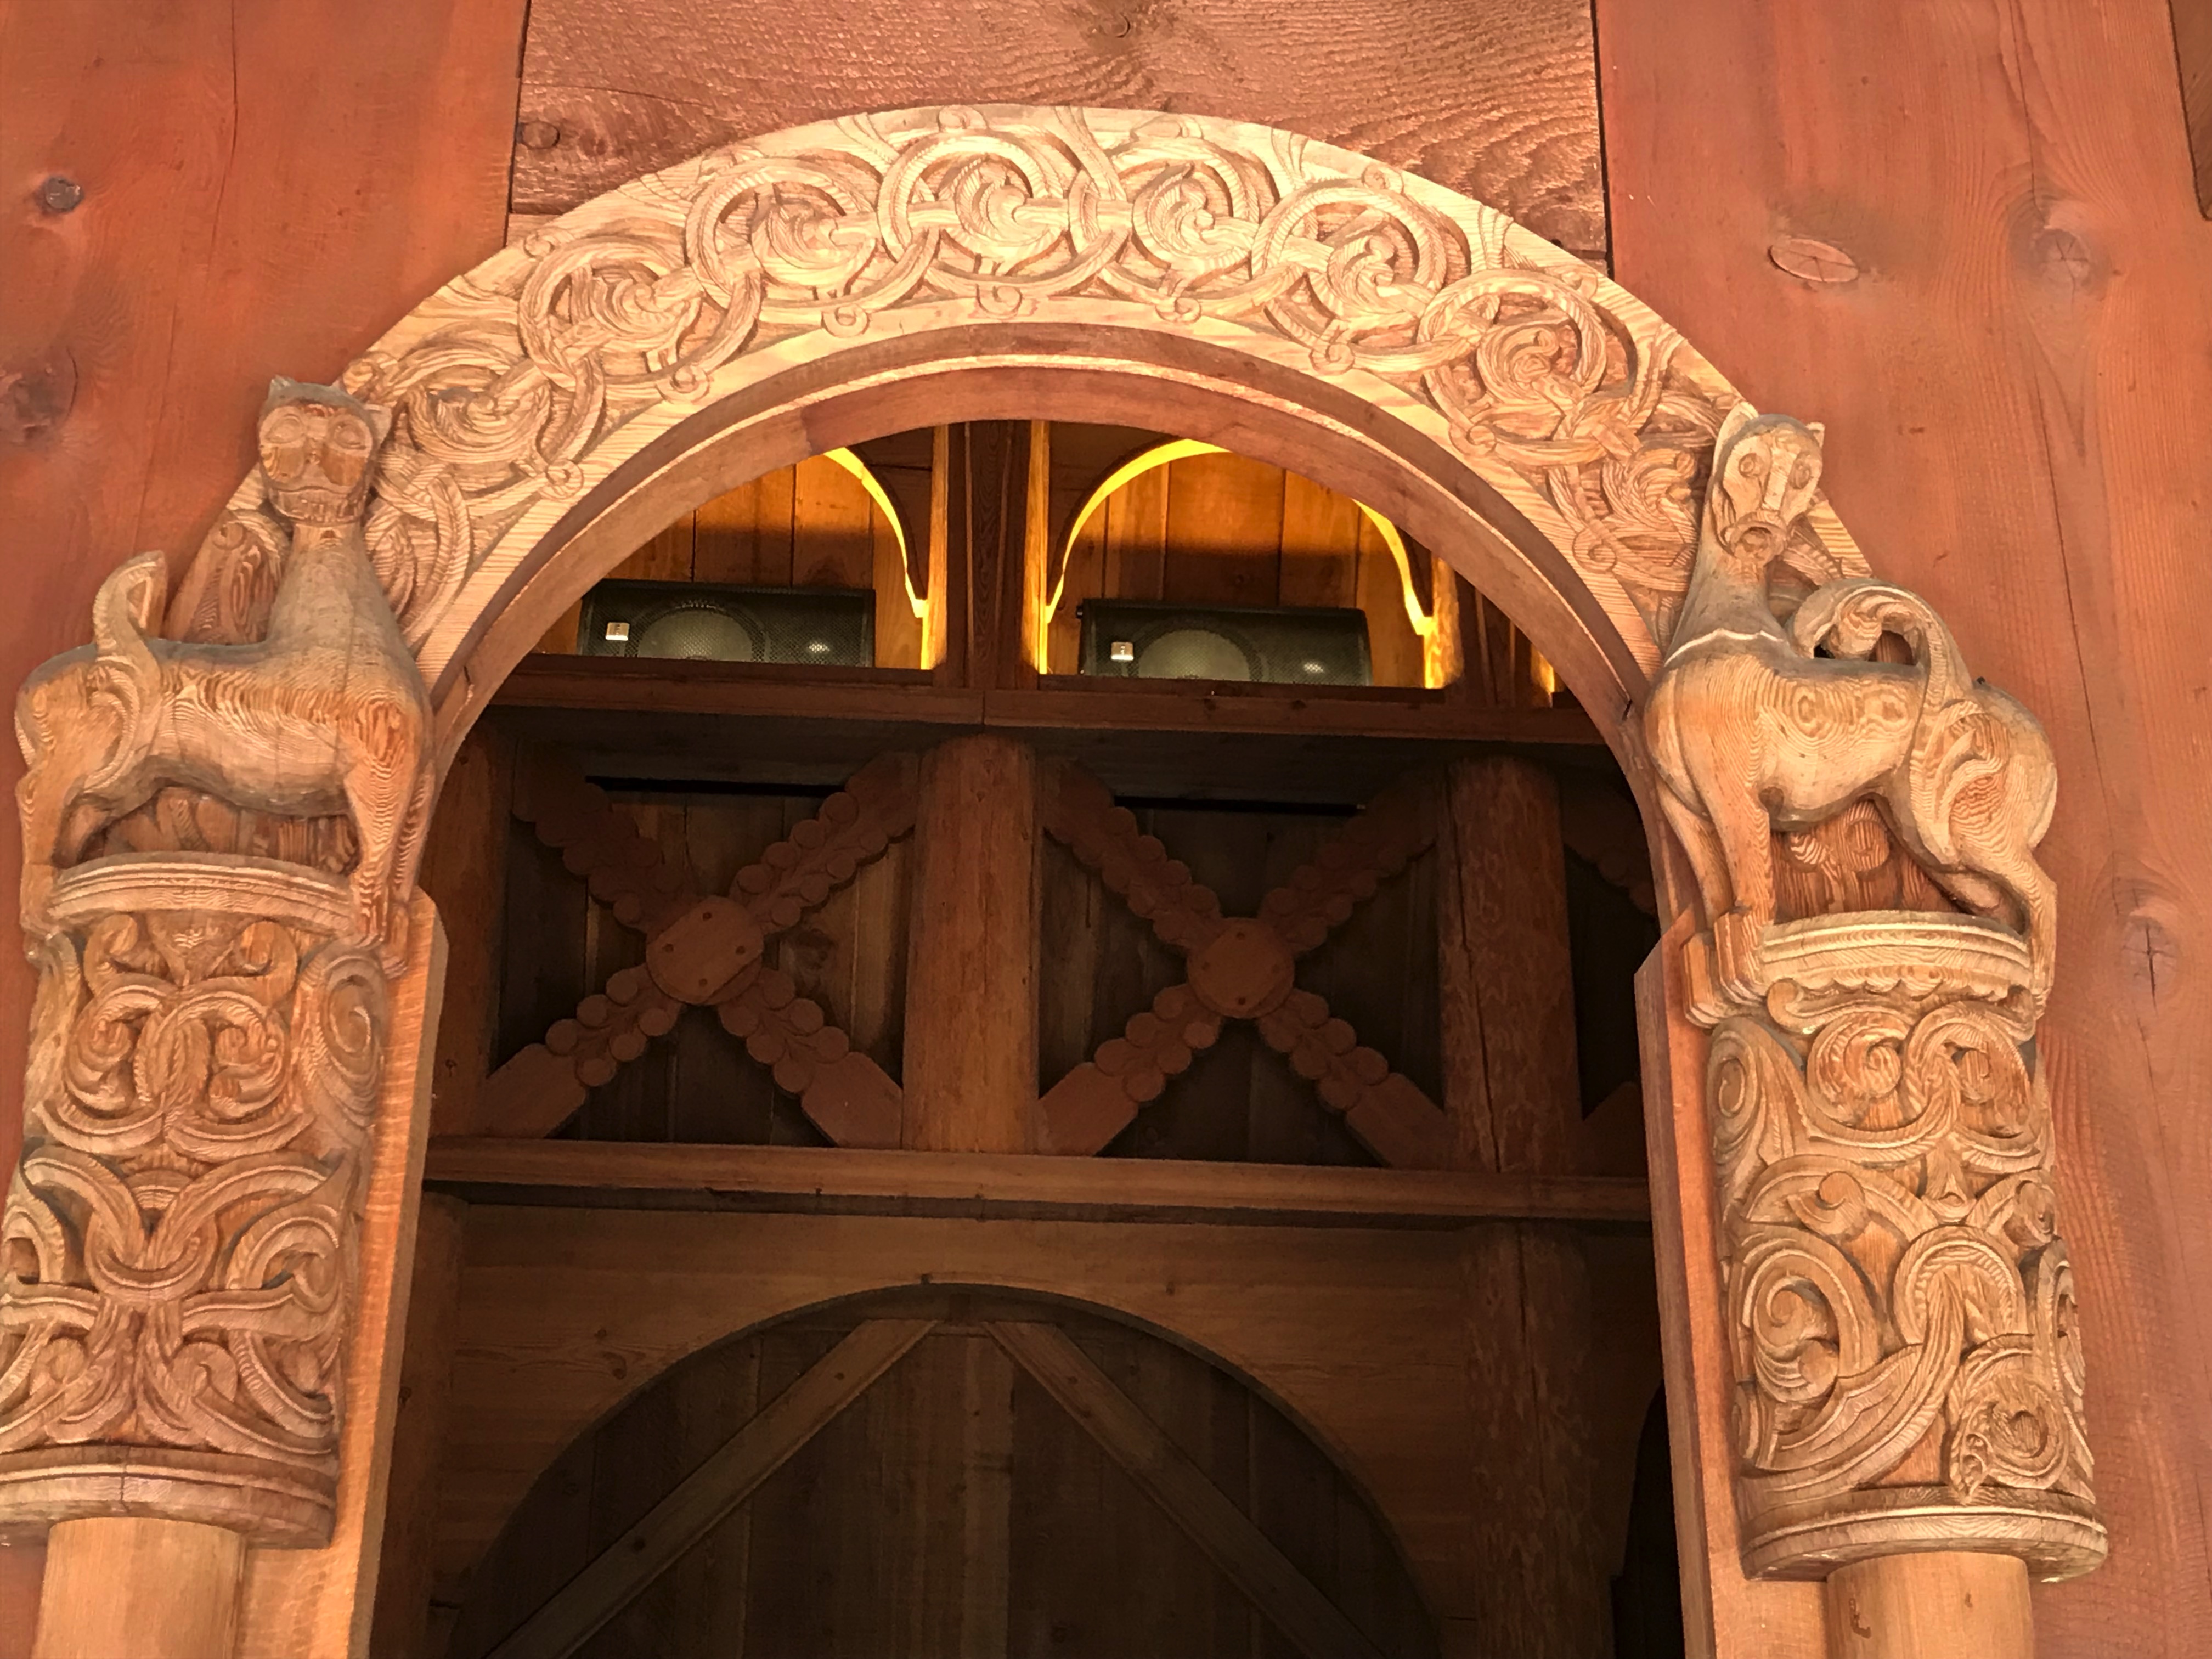 Wooden entrance to a church with an ornate border